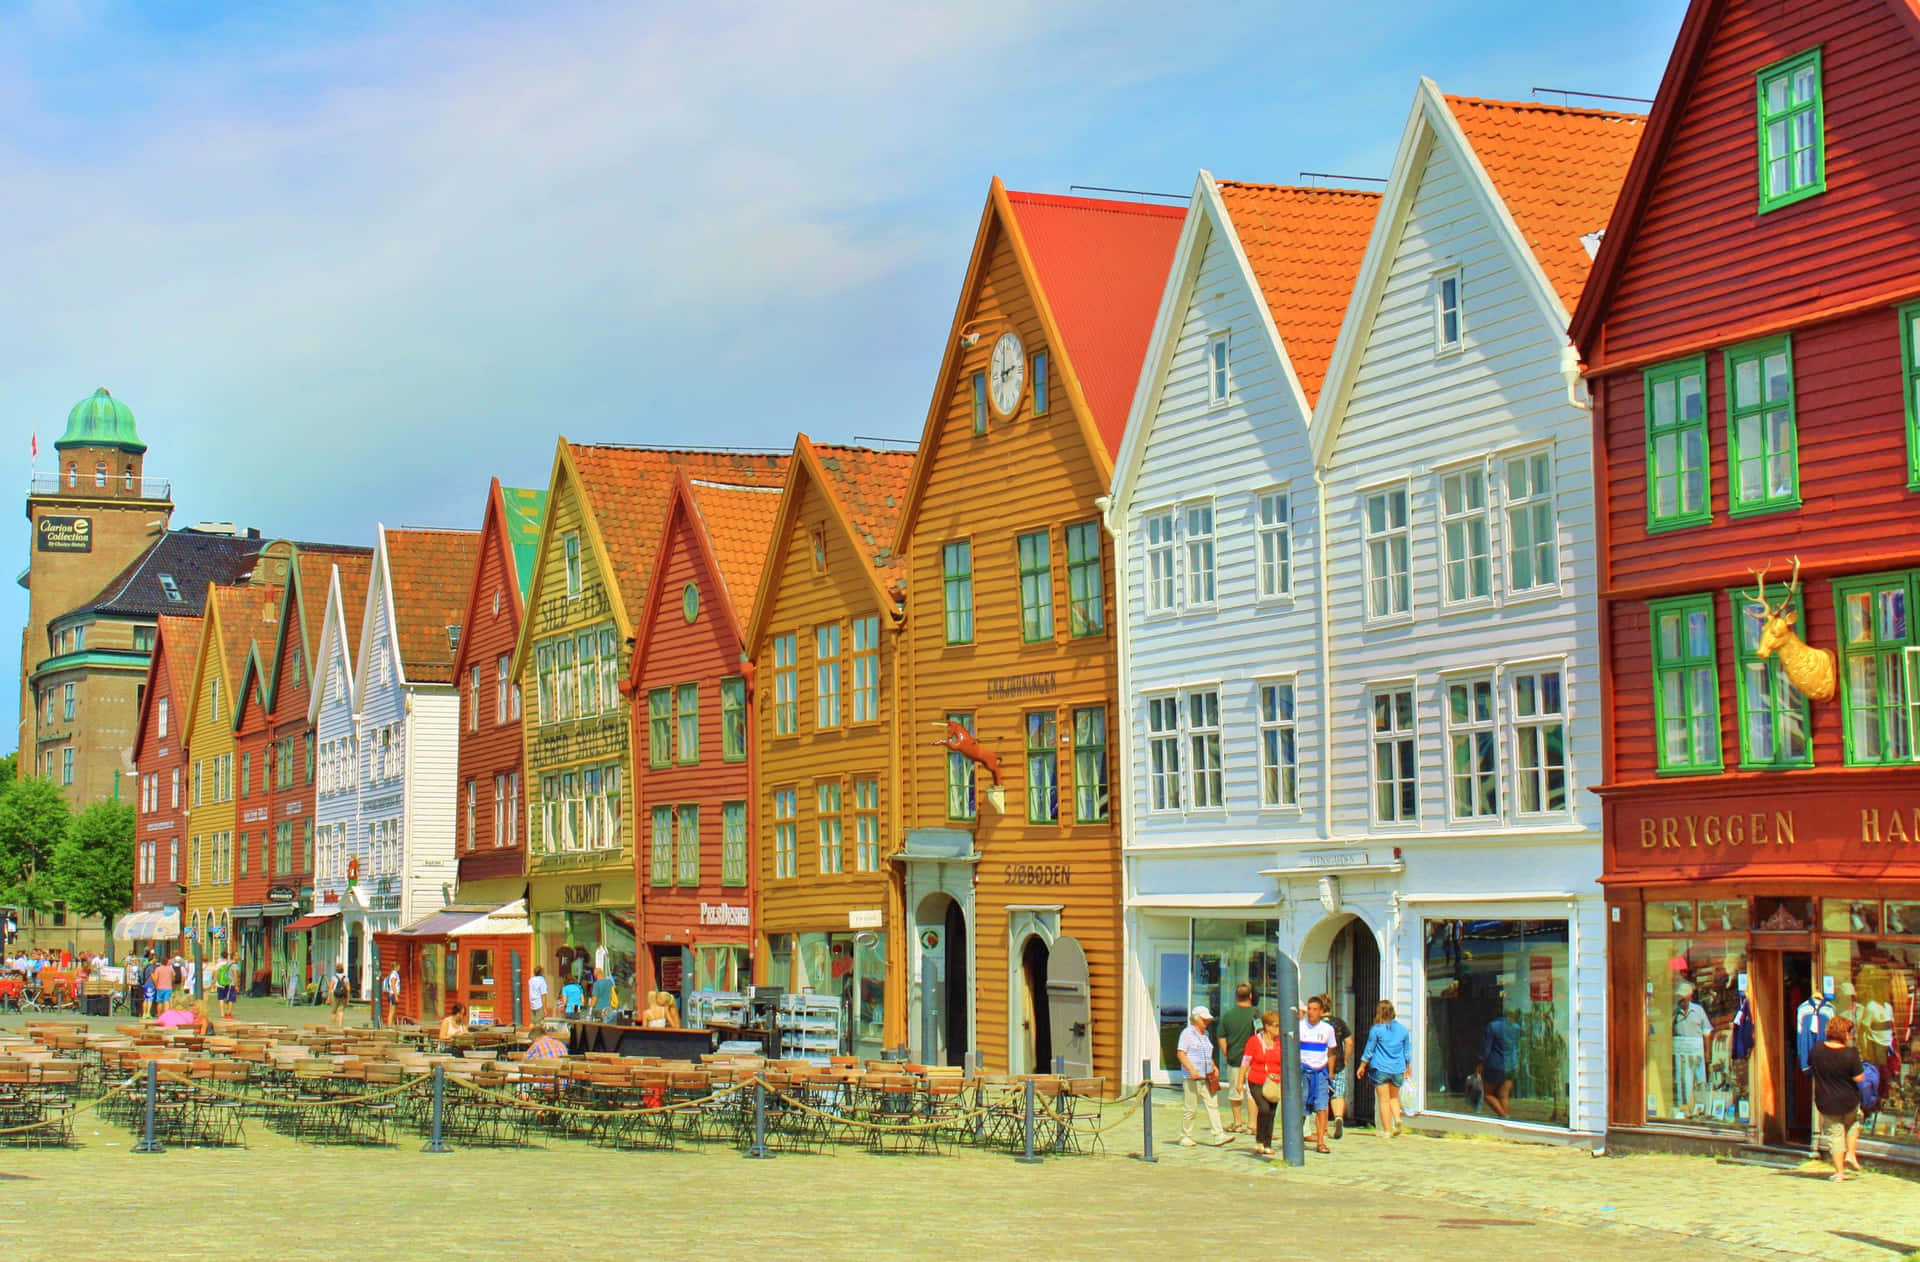 Bryggenis A Historic District In Bergen, Norway, Known For Its Iconic Colorful Wooden Buildings. It Is A Popular Tourist Attraction And A Unesco World Heritage Site. Fondo de pantalla